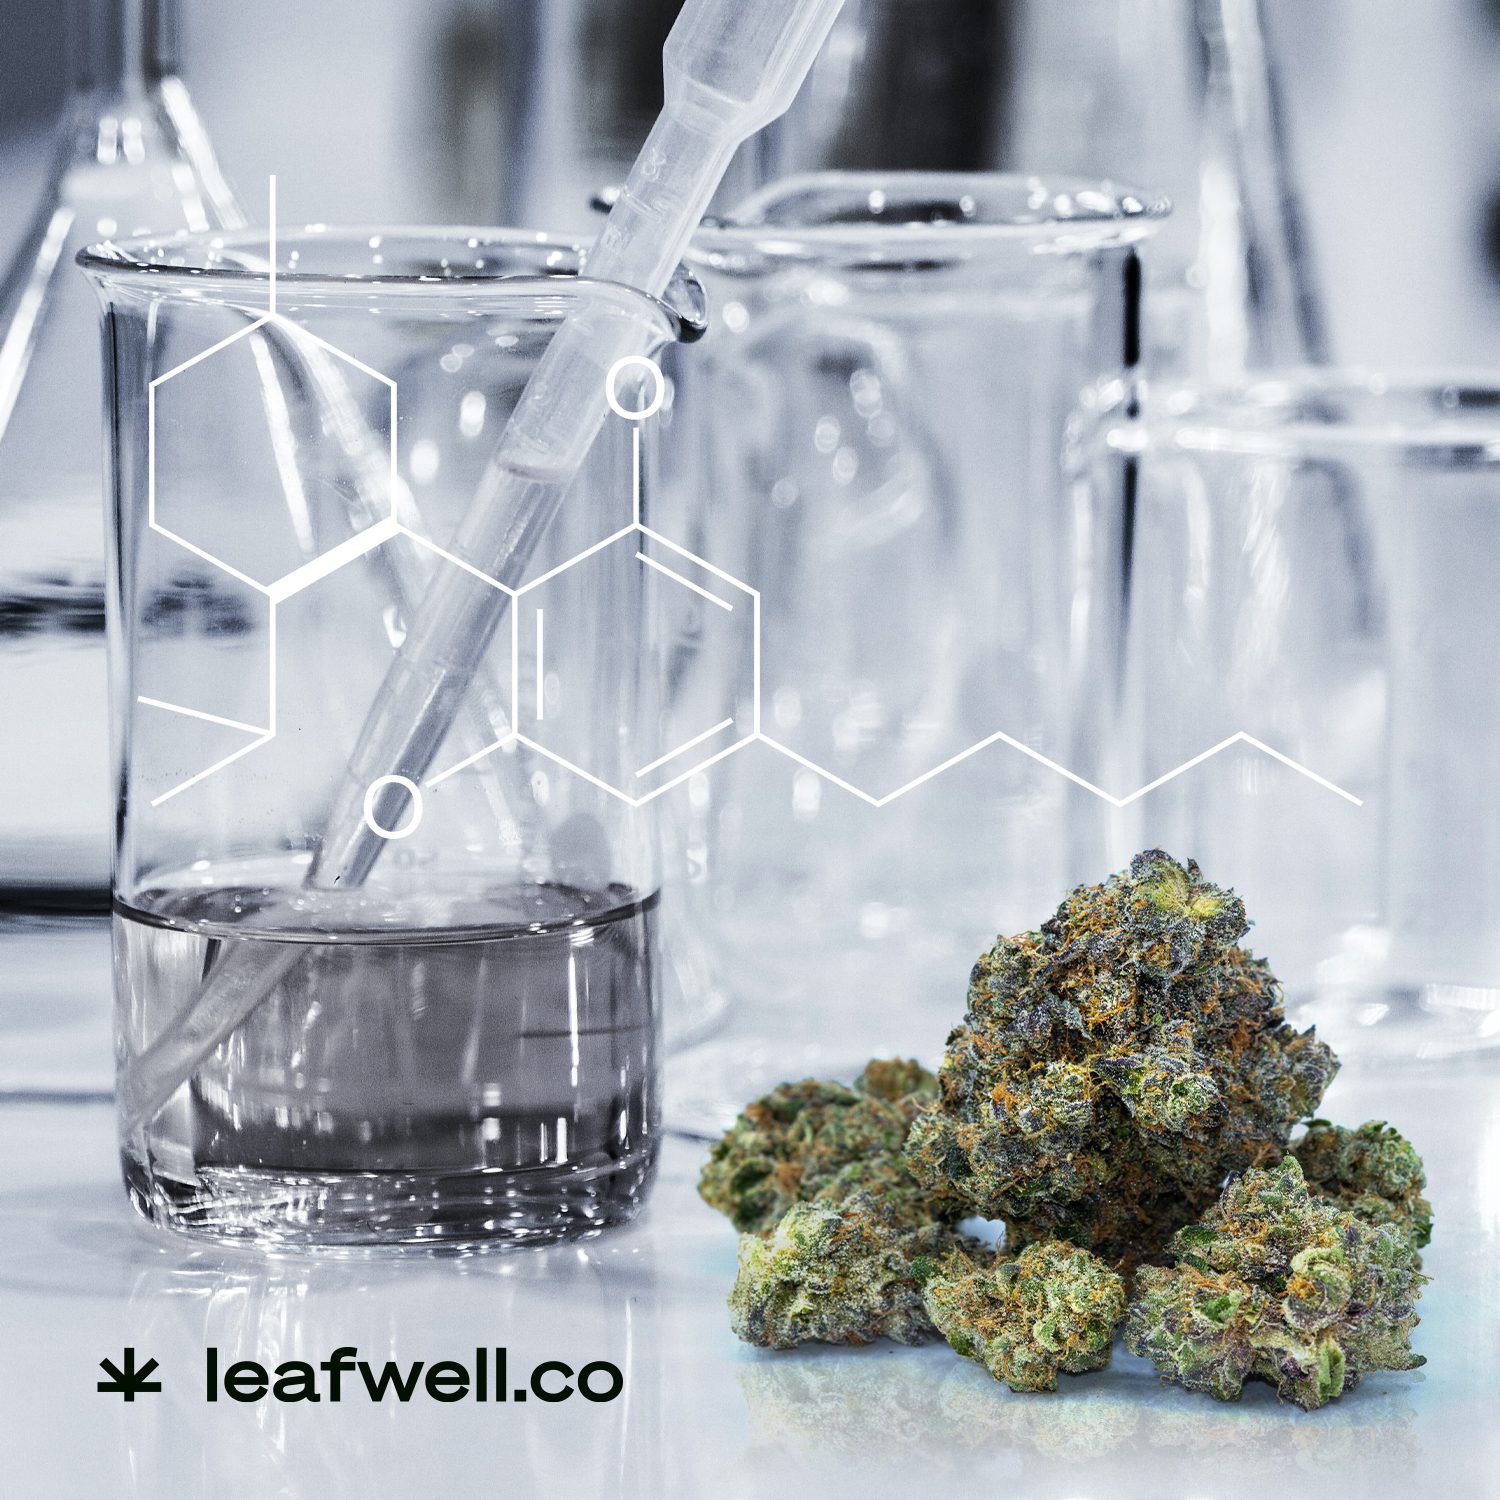 laboratory instruments next to a cannabis flower